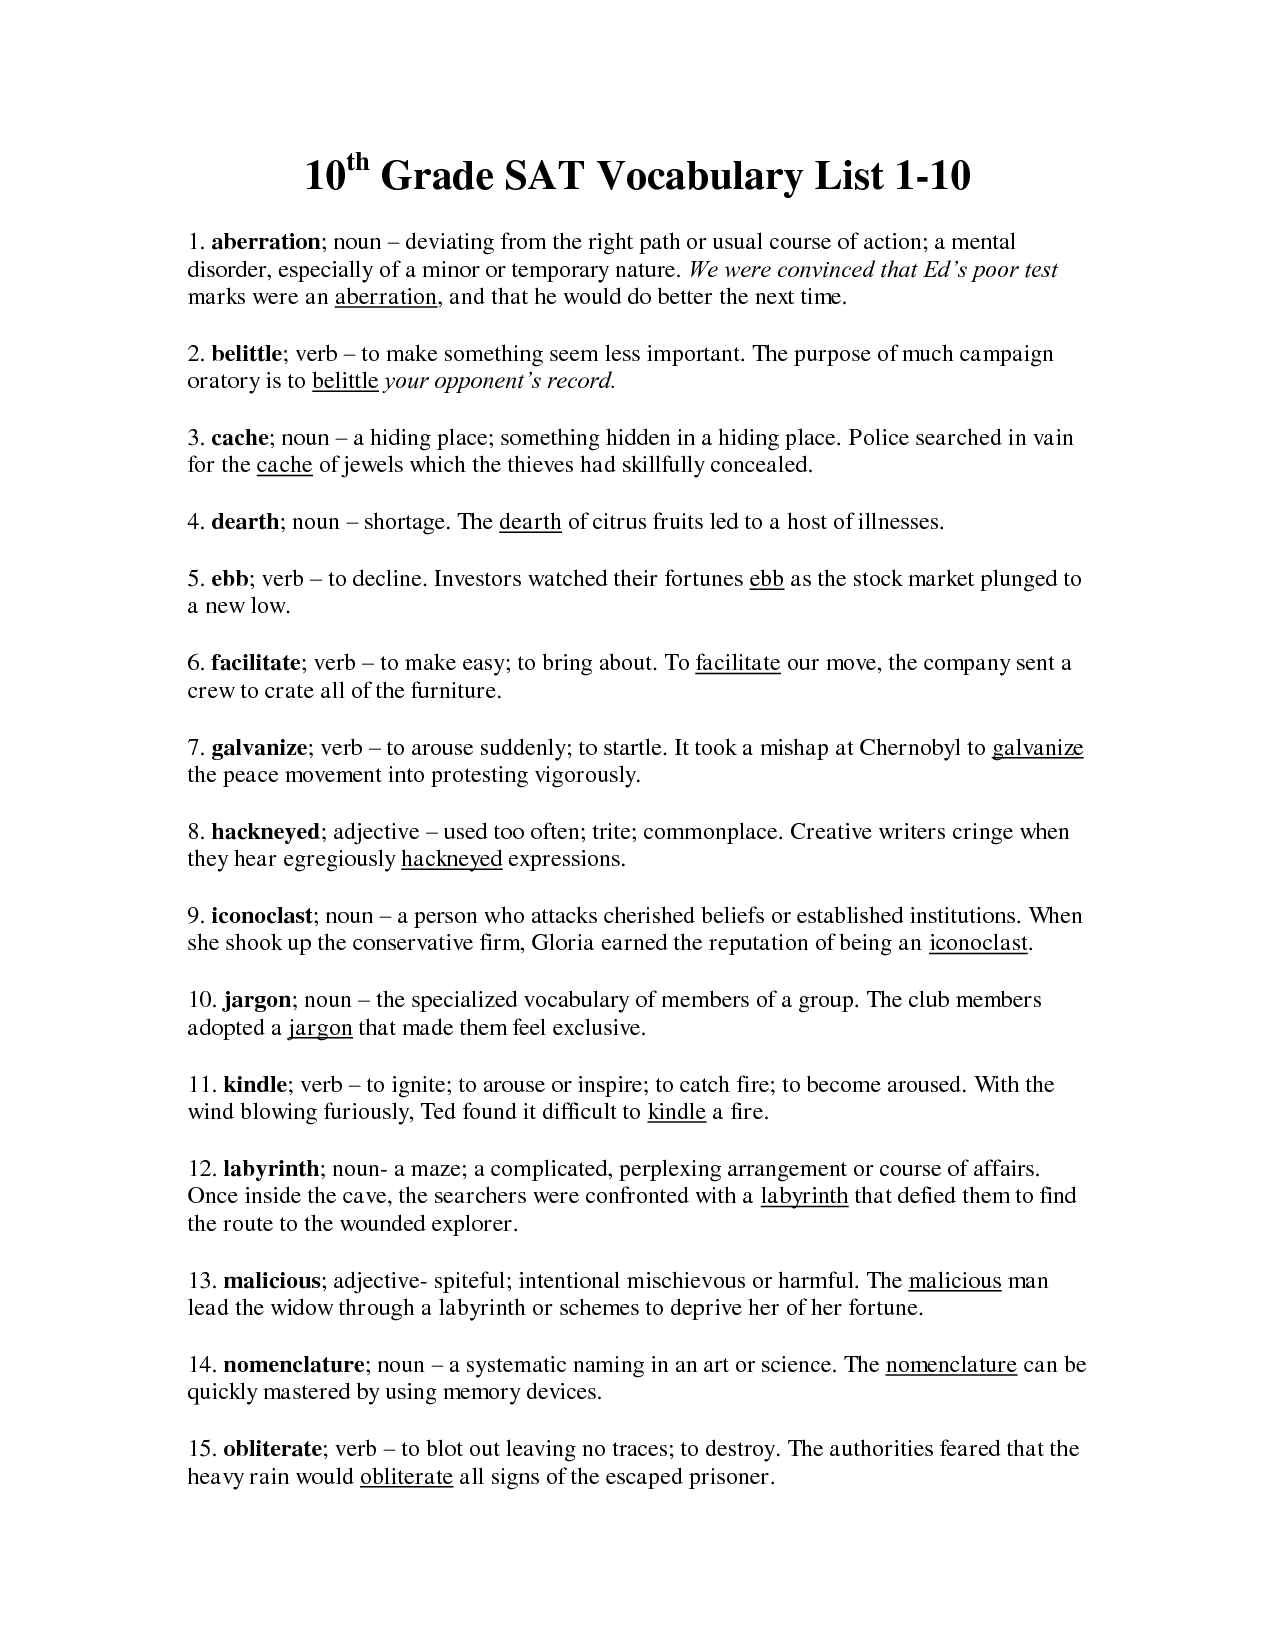 14-best-images-of-10th-grade-english-worksheets-10th-grade-reading-worksheets-printable-high